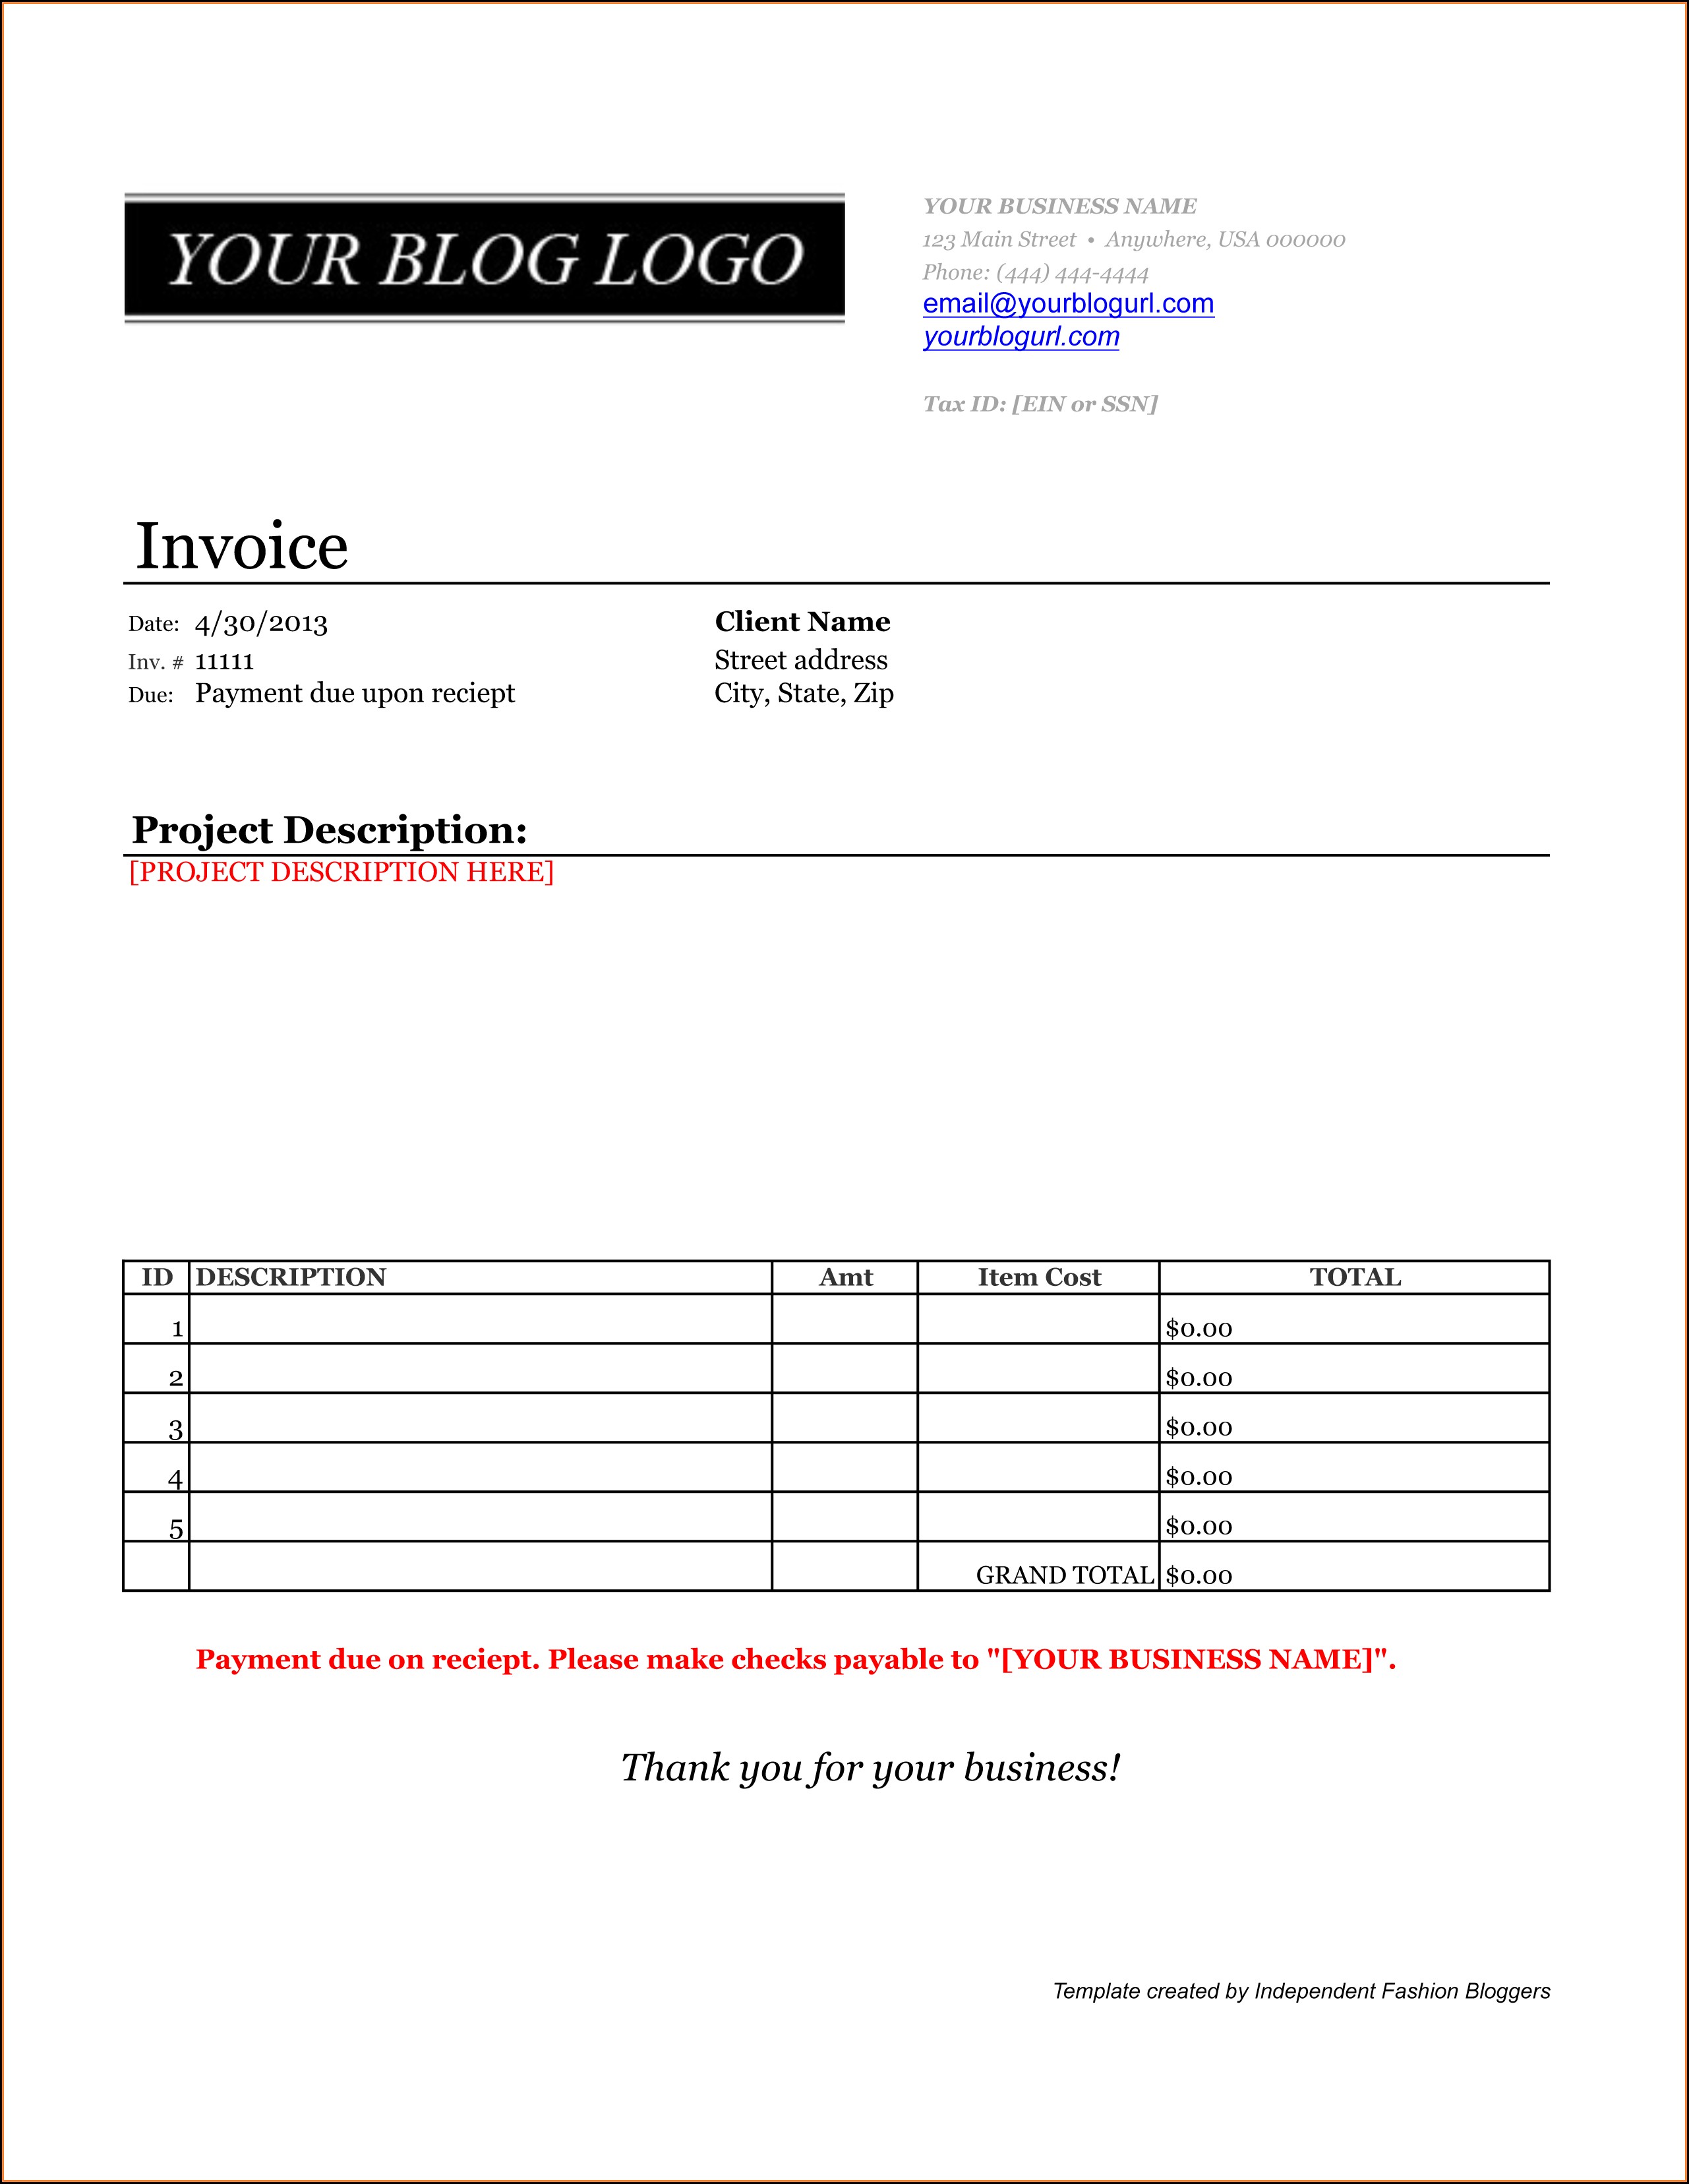 Invoice Paid Template Template 2 Resume Examples a6YnzrEYBg